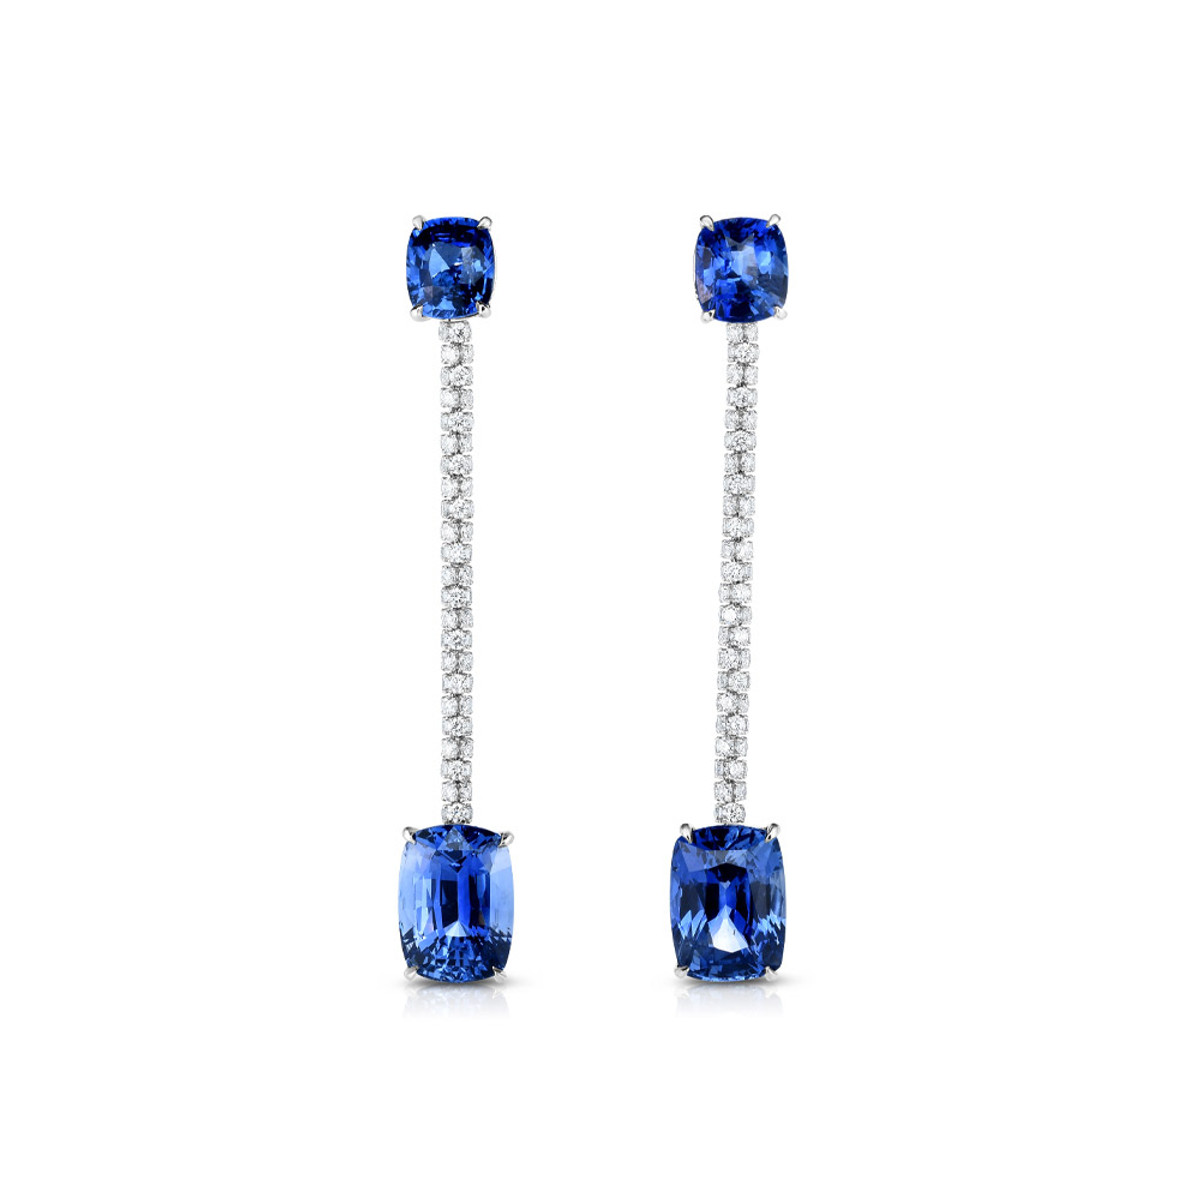 Hyde Park Collection Platinum Sapphire and Diamond Earrings-46989 Product Image